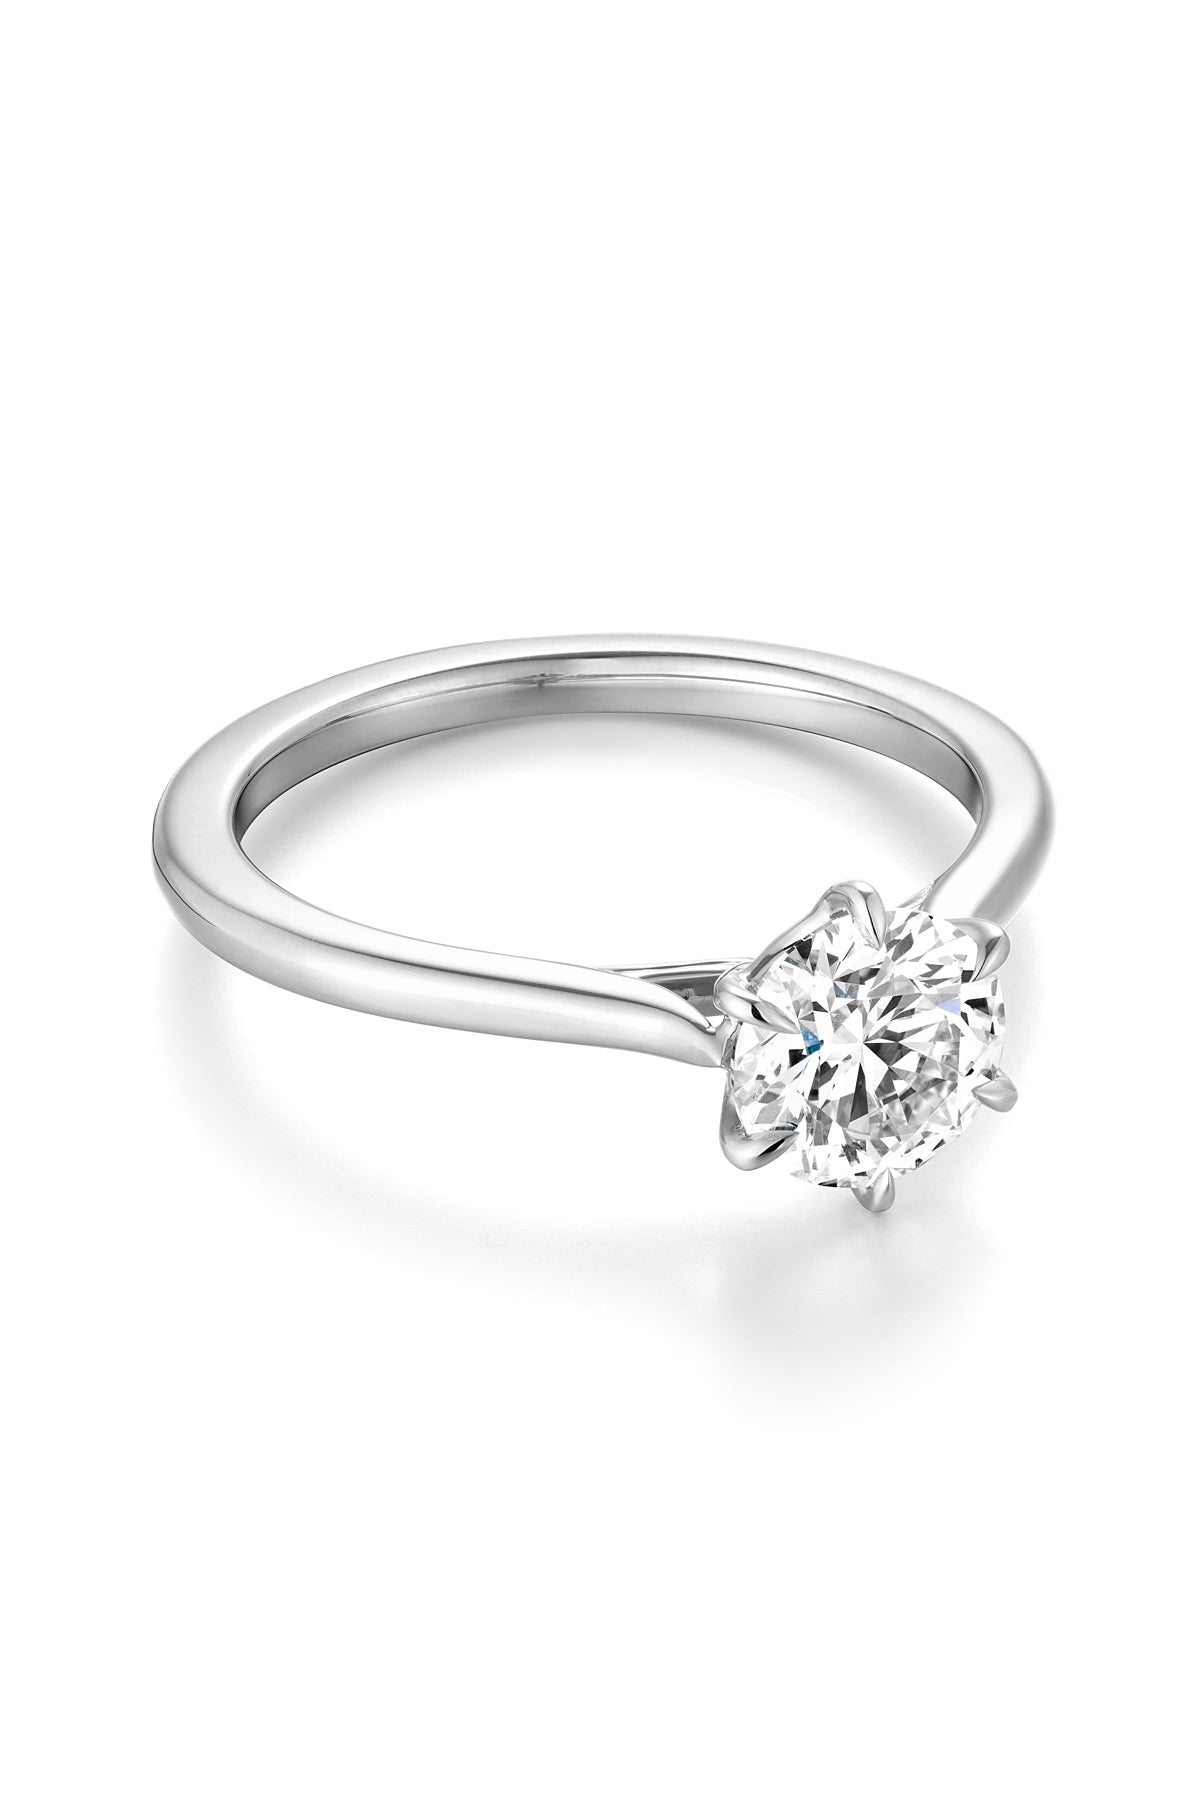 Camilla 6 Prong Engagement Ring From Hearts On Fire available at LeGassick Diamonds and Jewellery Gold Coast, Australia.